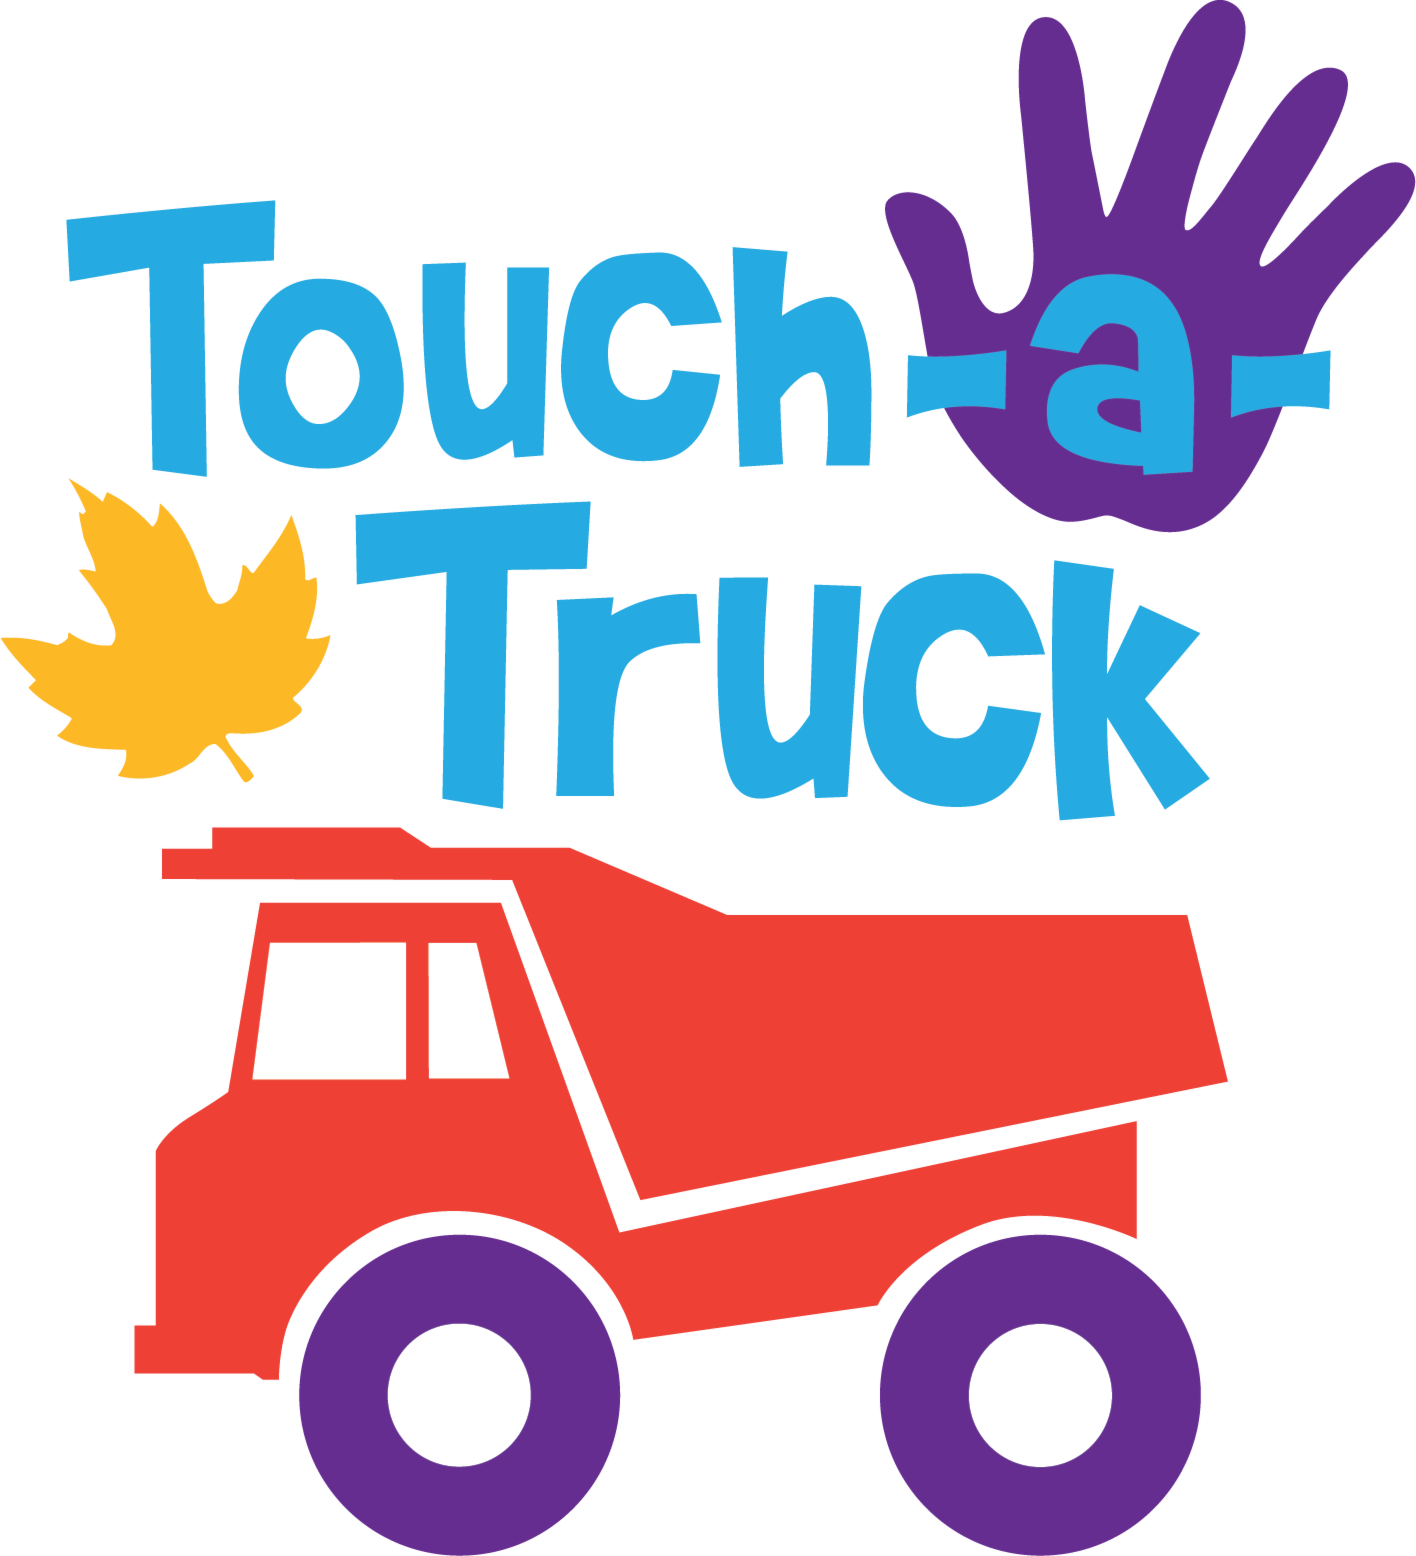 graphic with a truck and hand